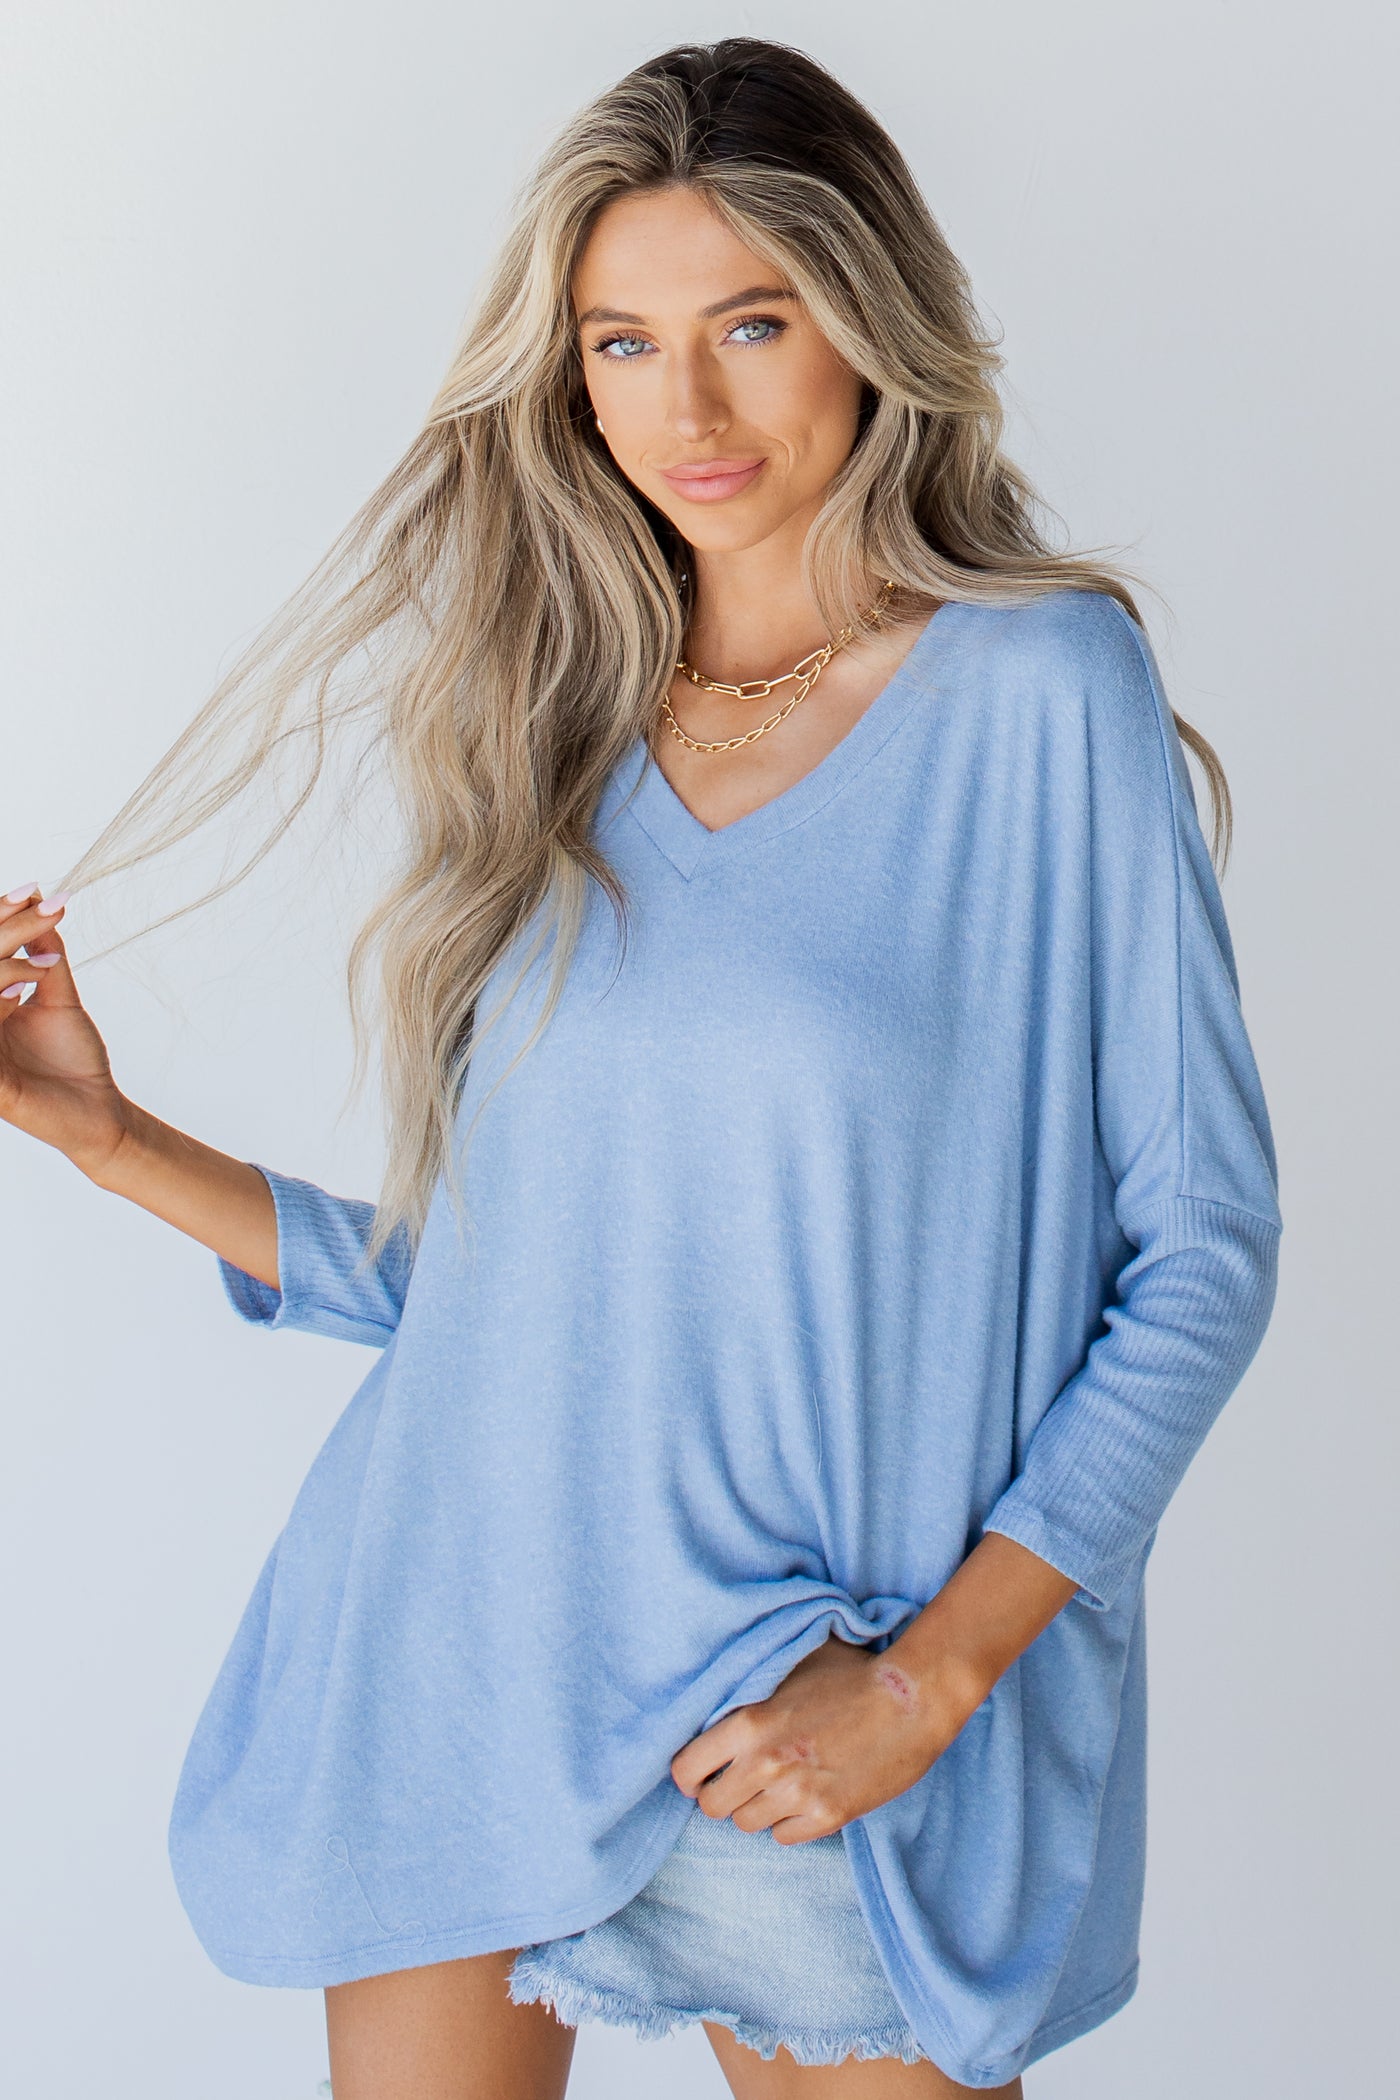 Brushed Knit Top in light blue